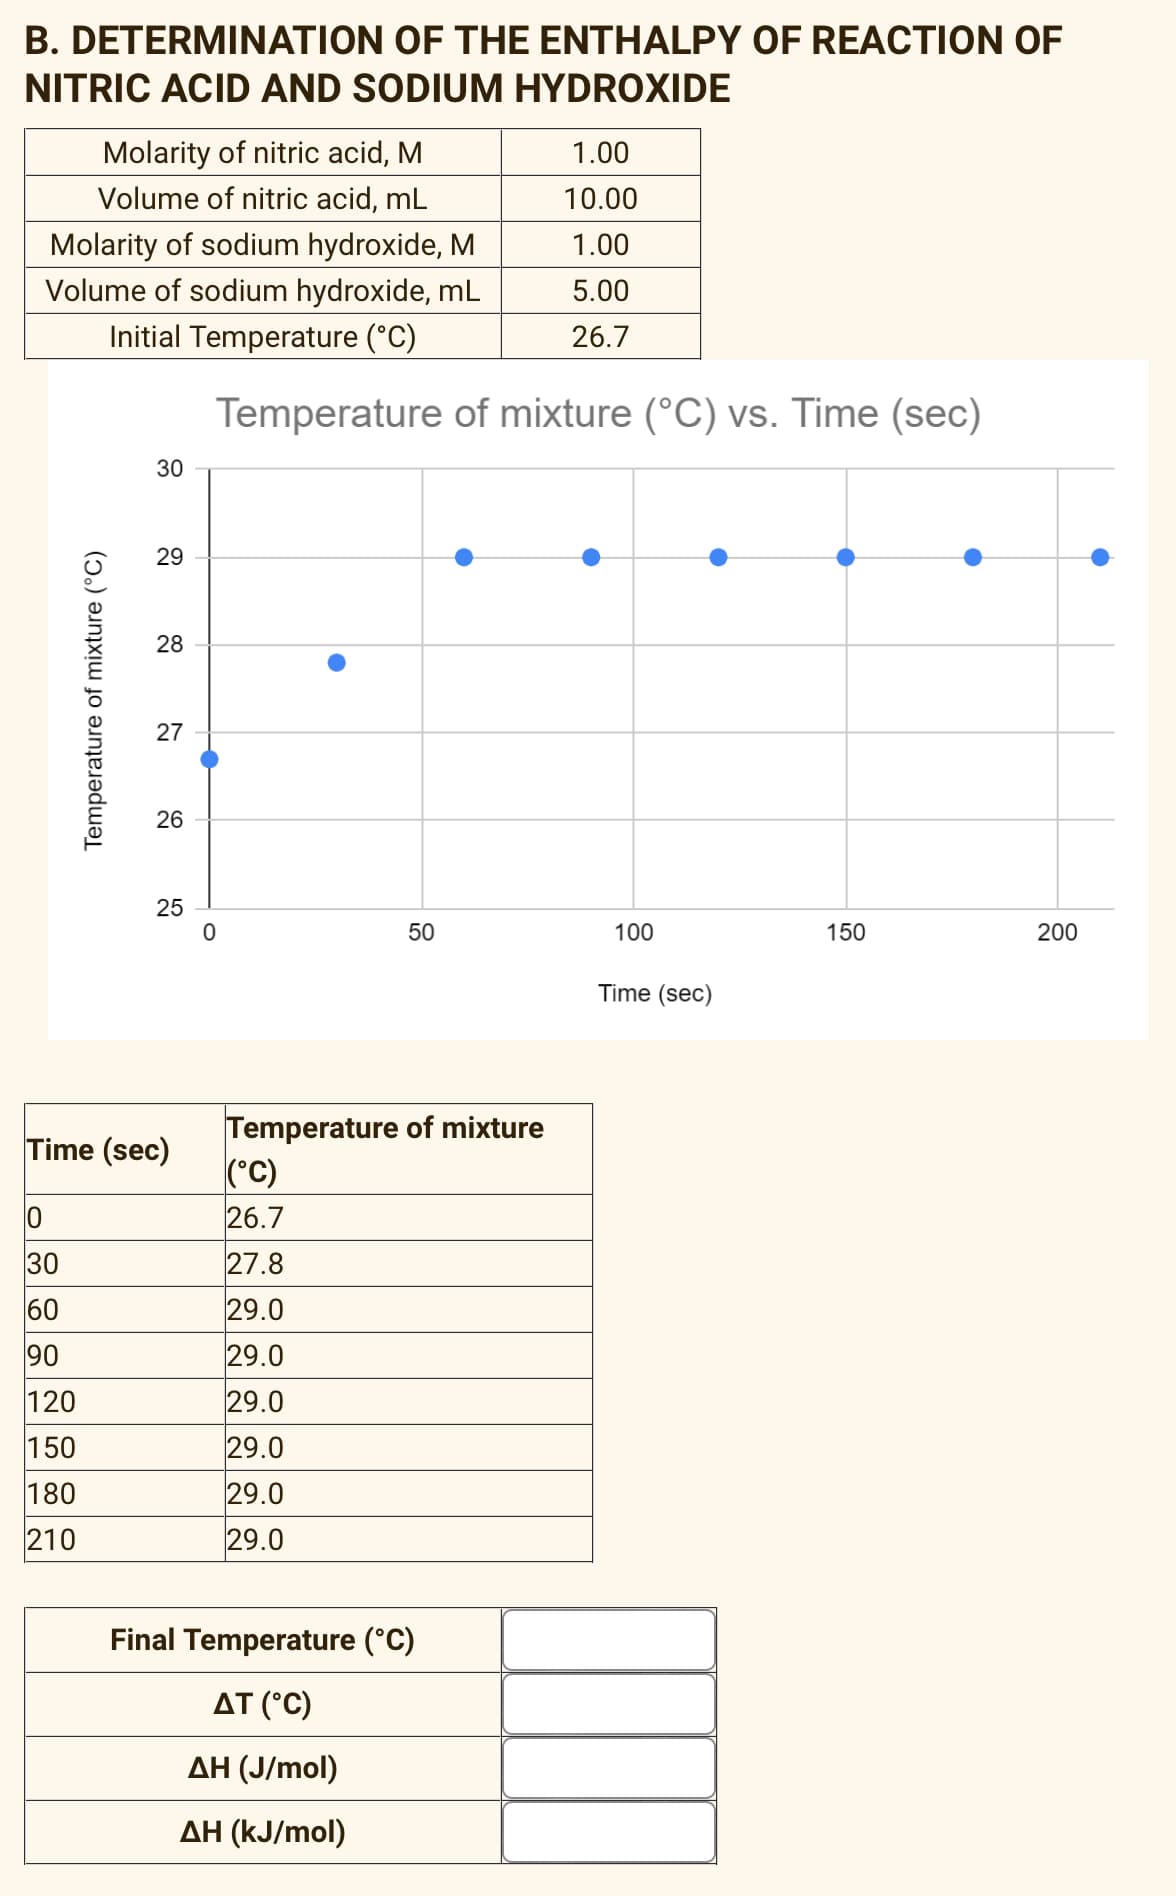 B. DETERMINATION OF THE ENTHALPY OF REACTION OF
NITRIC ACID AND SODIUM HYDROXIDE
Molarity of nitric acid, M
1.00
Volume of nitric acid, mL
10.00
Molarity of sodium hydroxide, M
1.00
Volume of sodium hydroxide, mL
5.00
Initial Temperature (°C)
26.7
Temperature of mixture (°C) vs. Time (sec)
30
29
28
27
26
25
50
100
150
200
Time (sec)
Temperature of mixture
(°C)
26.7
Time (sec)
30
27.8
29.0
60
90
29.0
29.0
29.0
120
150
180
29.0
29.0
210
Final Temperature (°C)
AT (°C)
ΔΗ (J/mol)
AH (kJ/mol)
Temperature of mixture (°C)
